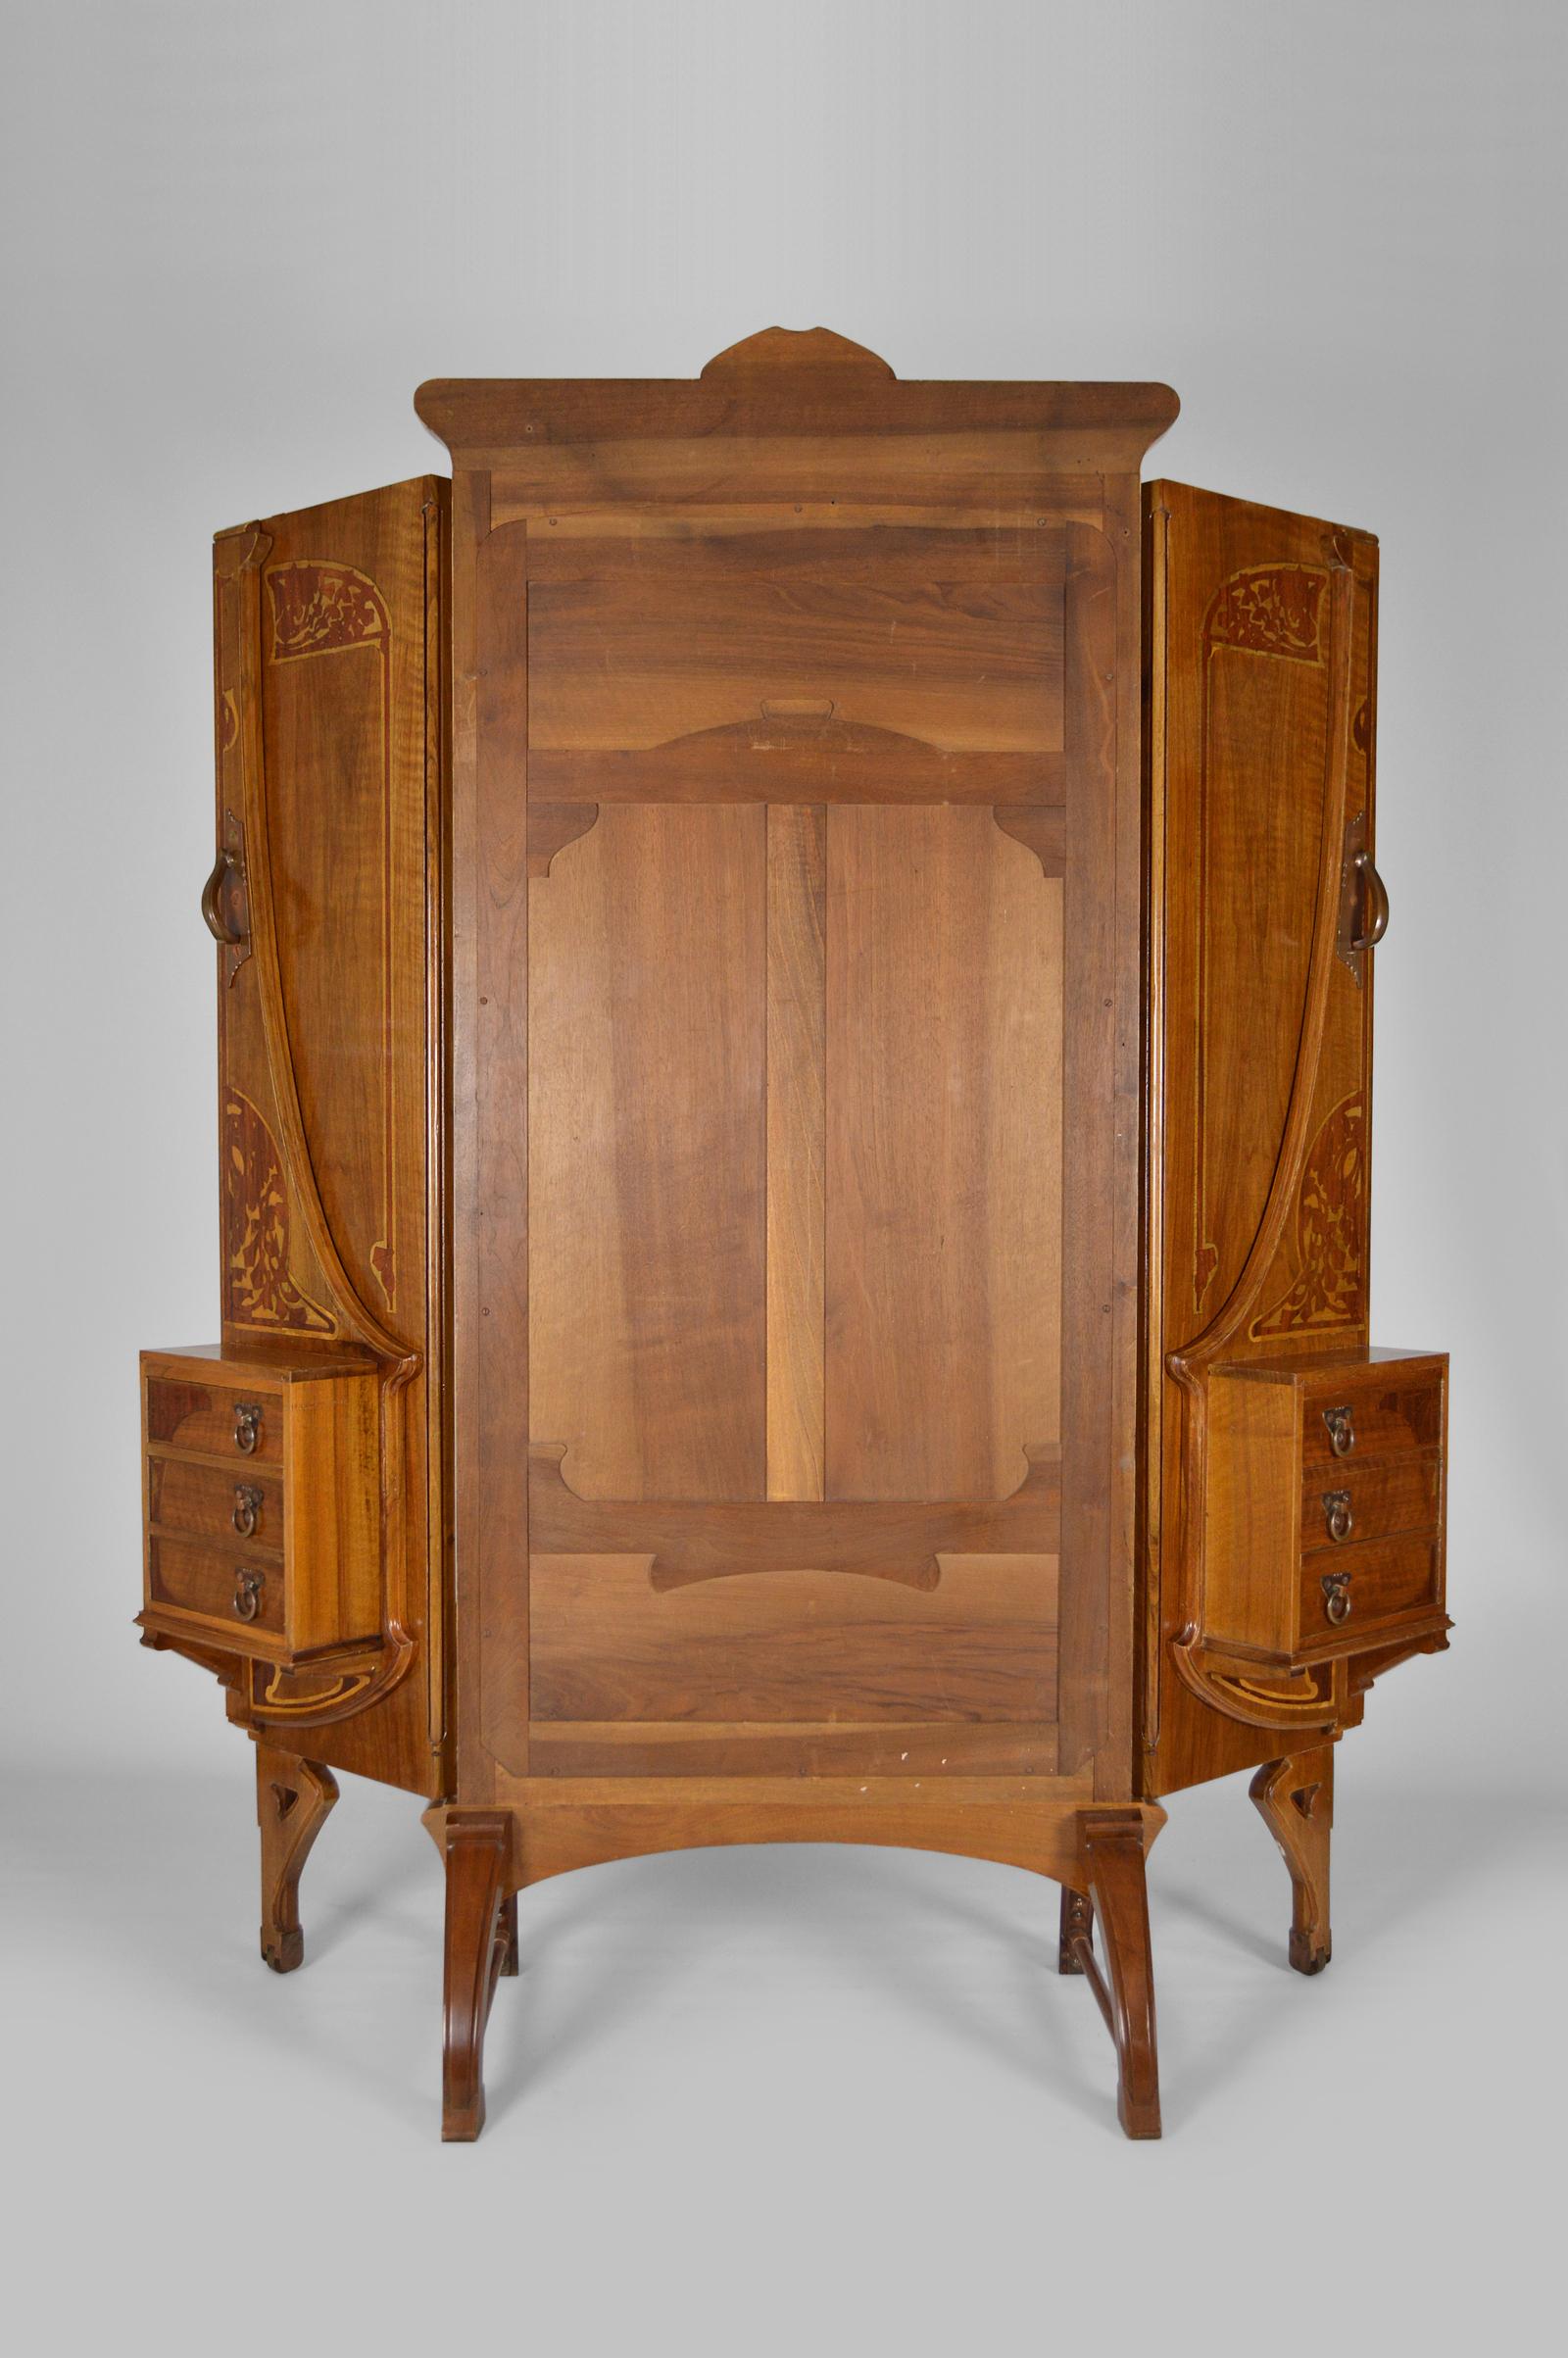 French Art Nouveau Cheval Mirror 5-Panel Screen / Vanity Dressing Table, 1901 For Sale 2